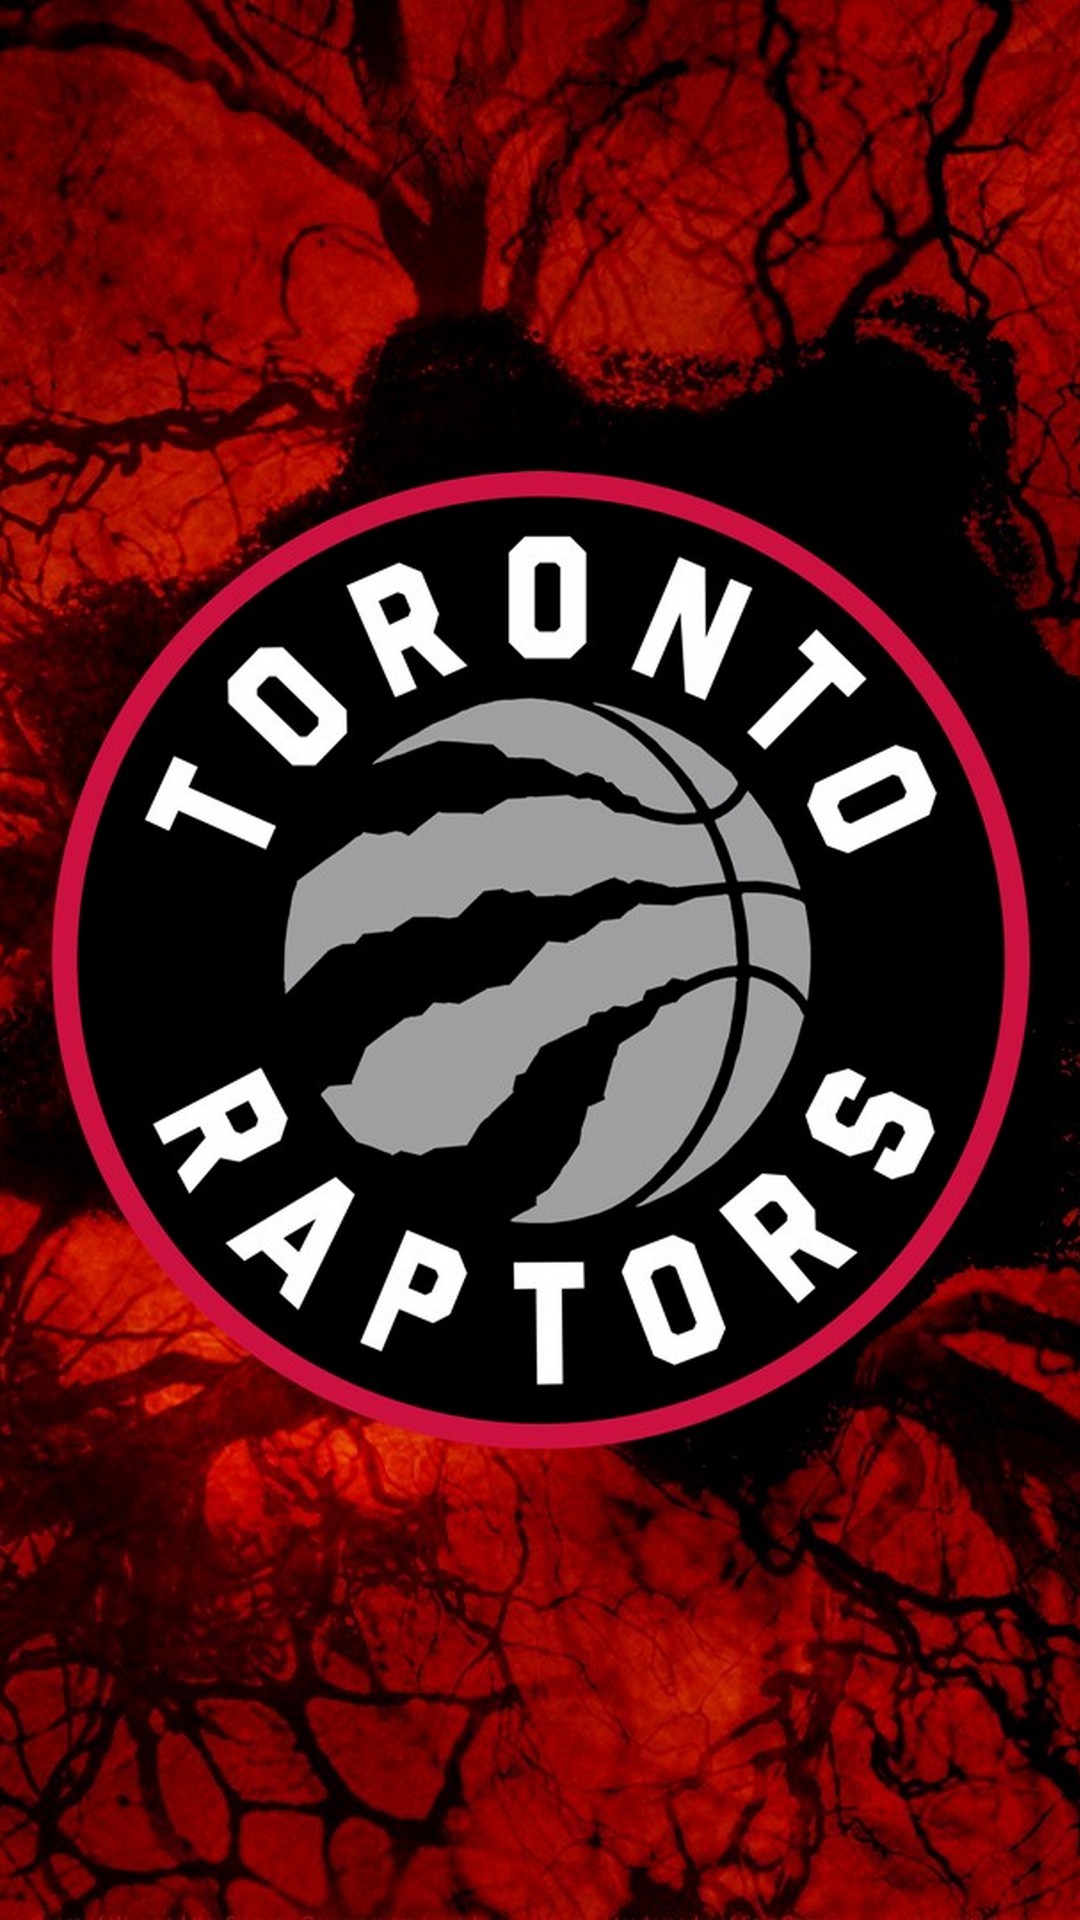 Wallpaper Android Toronto Raptors with resolution 1080X1920 pixel. You can make this wallpaper for your Android backgrounds, Tablet, Smartphones Screensavers and Mobile Phone Lock Screen